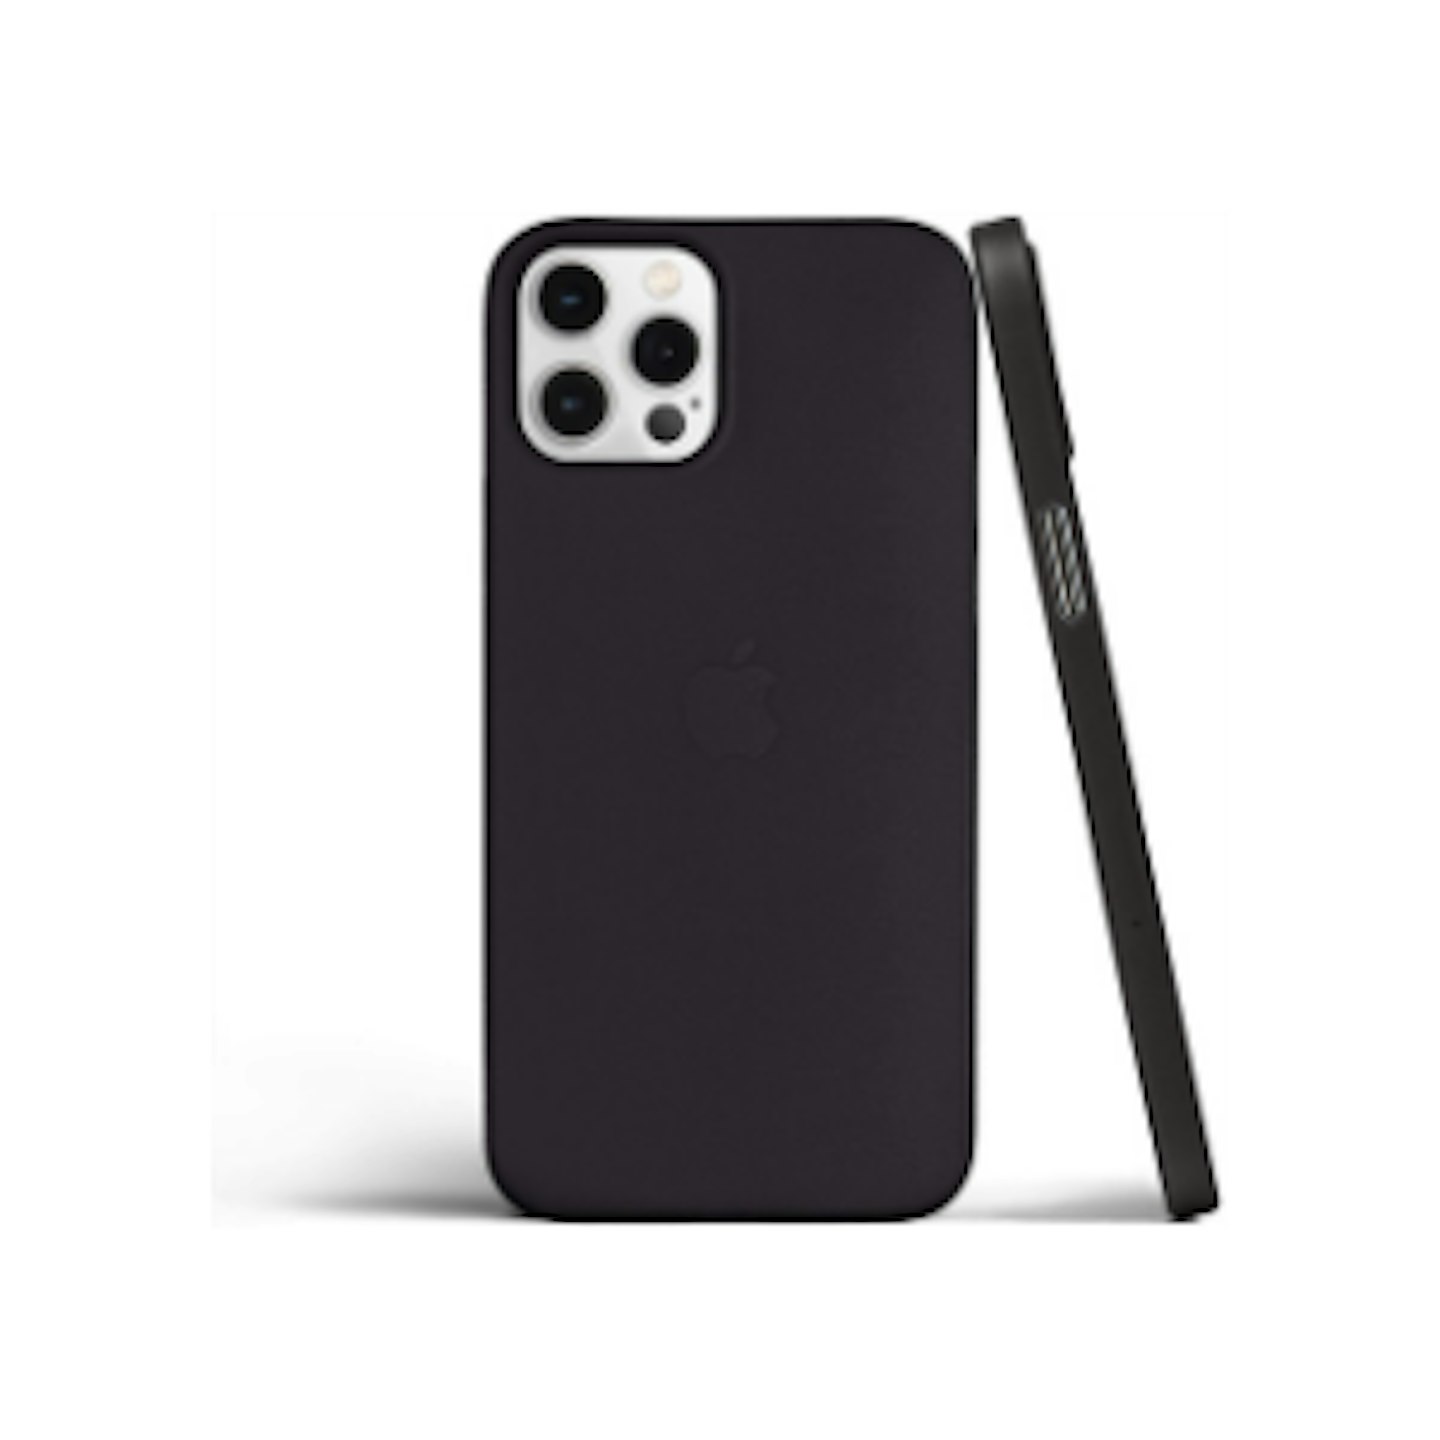 totallee Thin iPhone 12 Pro Max Case